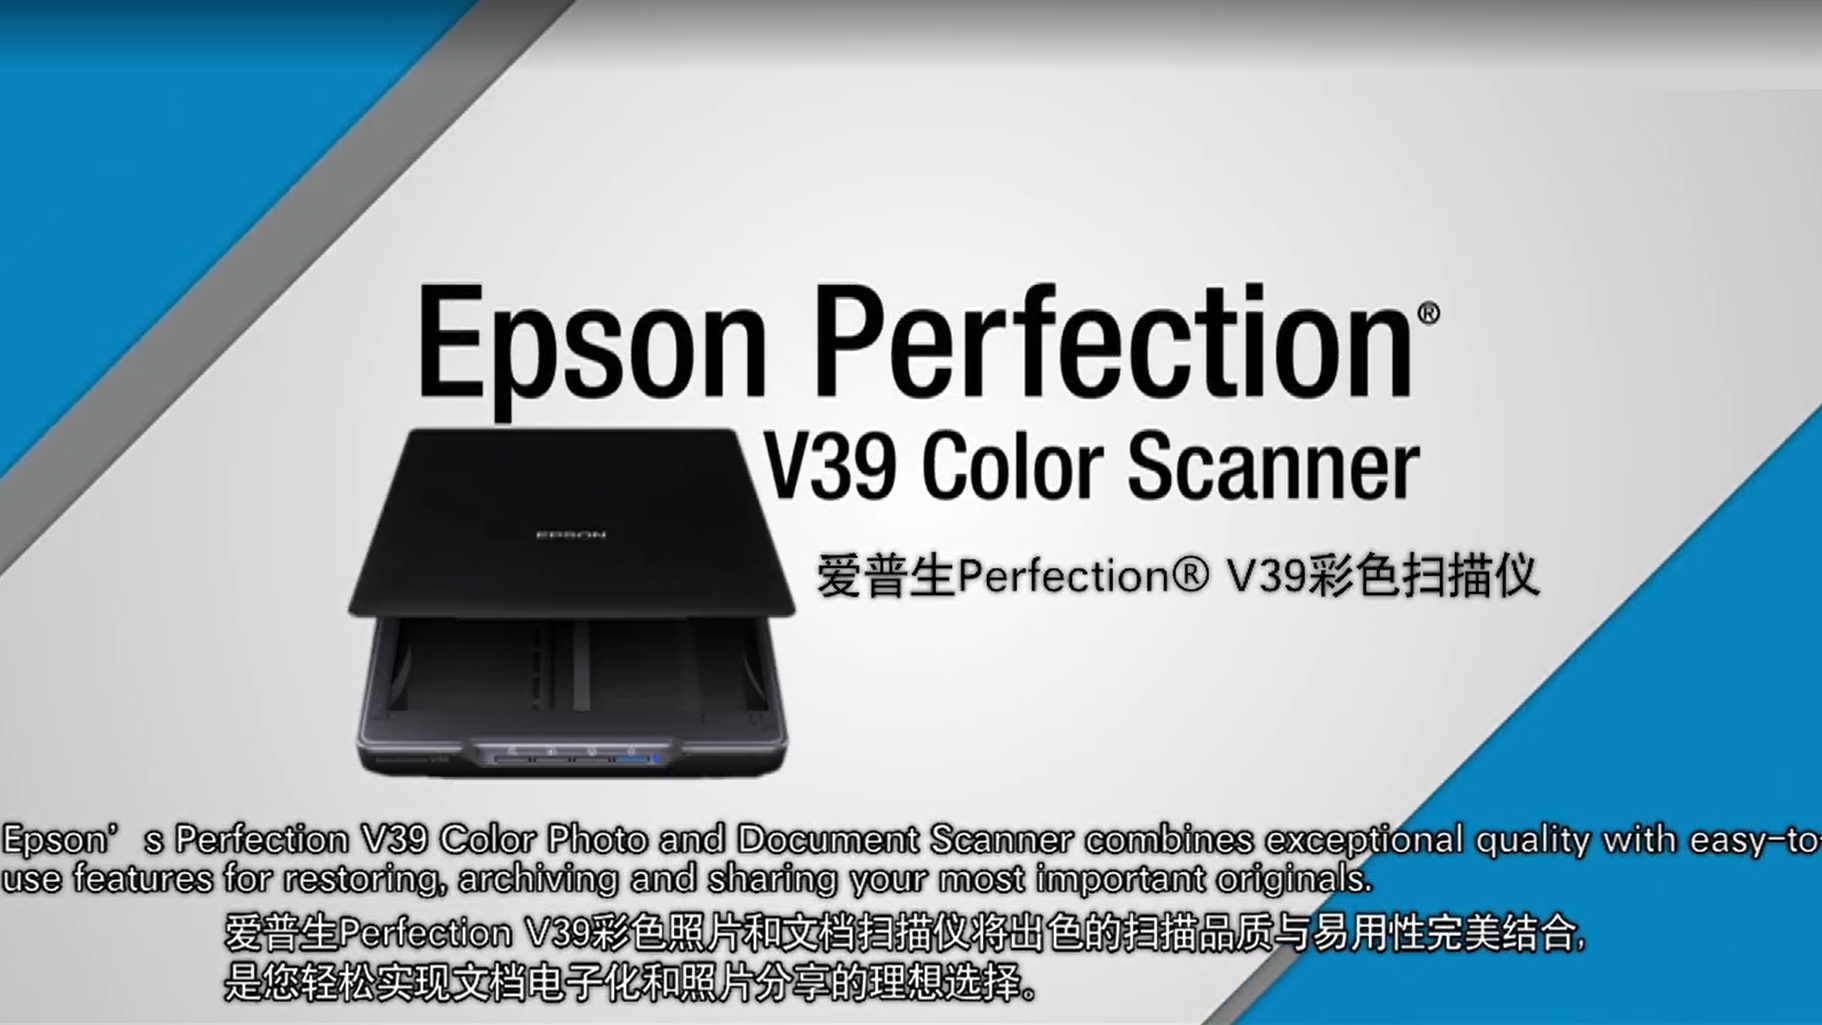 EPSON_PRODUCTS_Epson Perfection V39